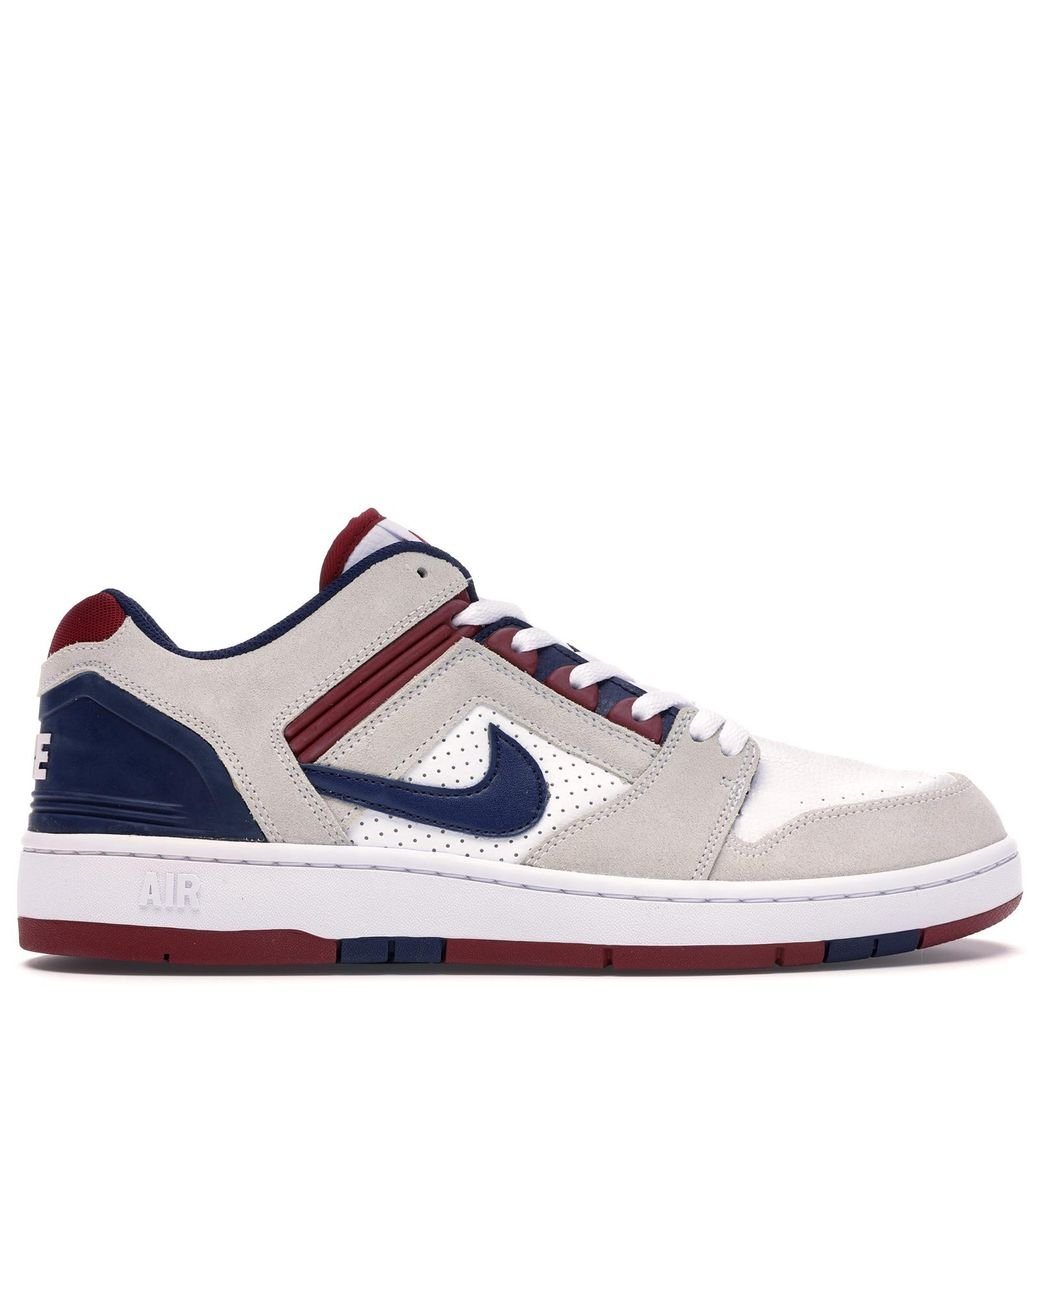 Nike Sb Air Force 2 Low 76ers in Real 